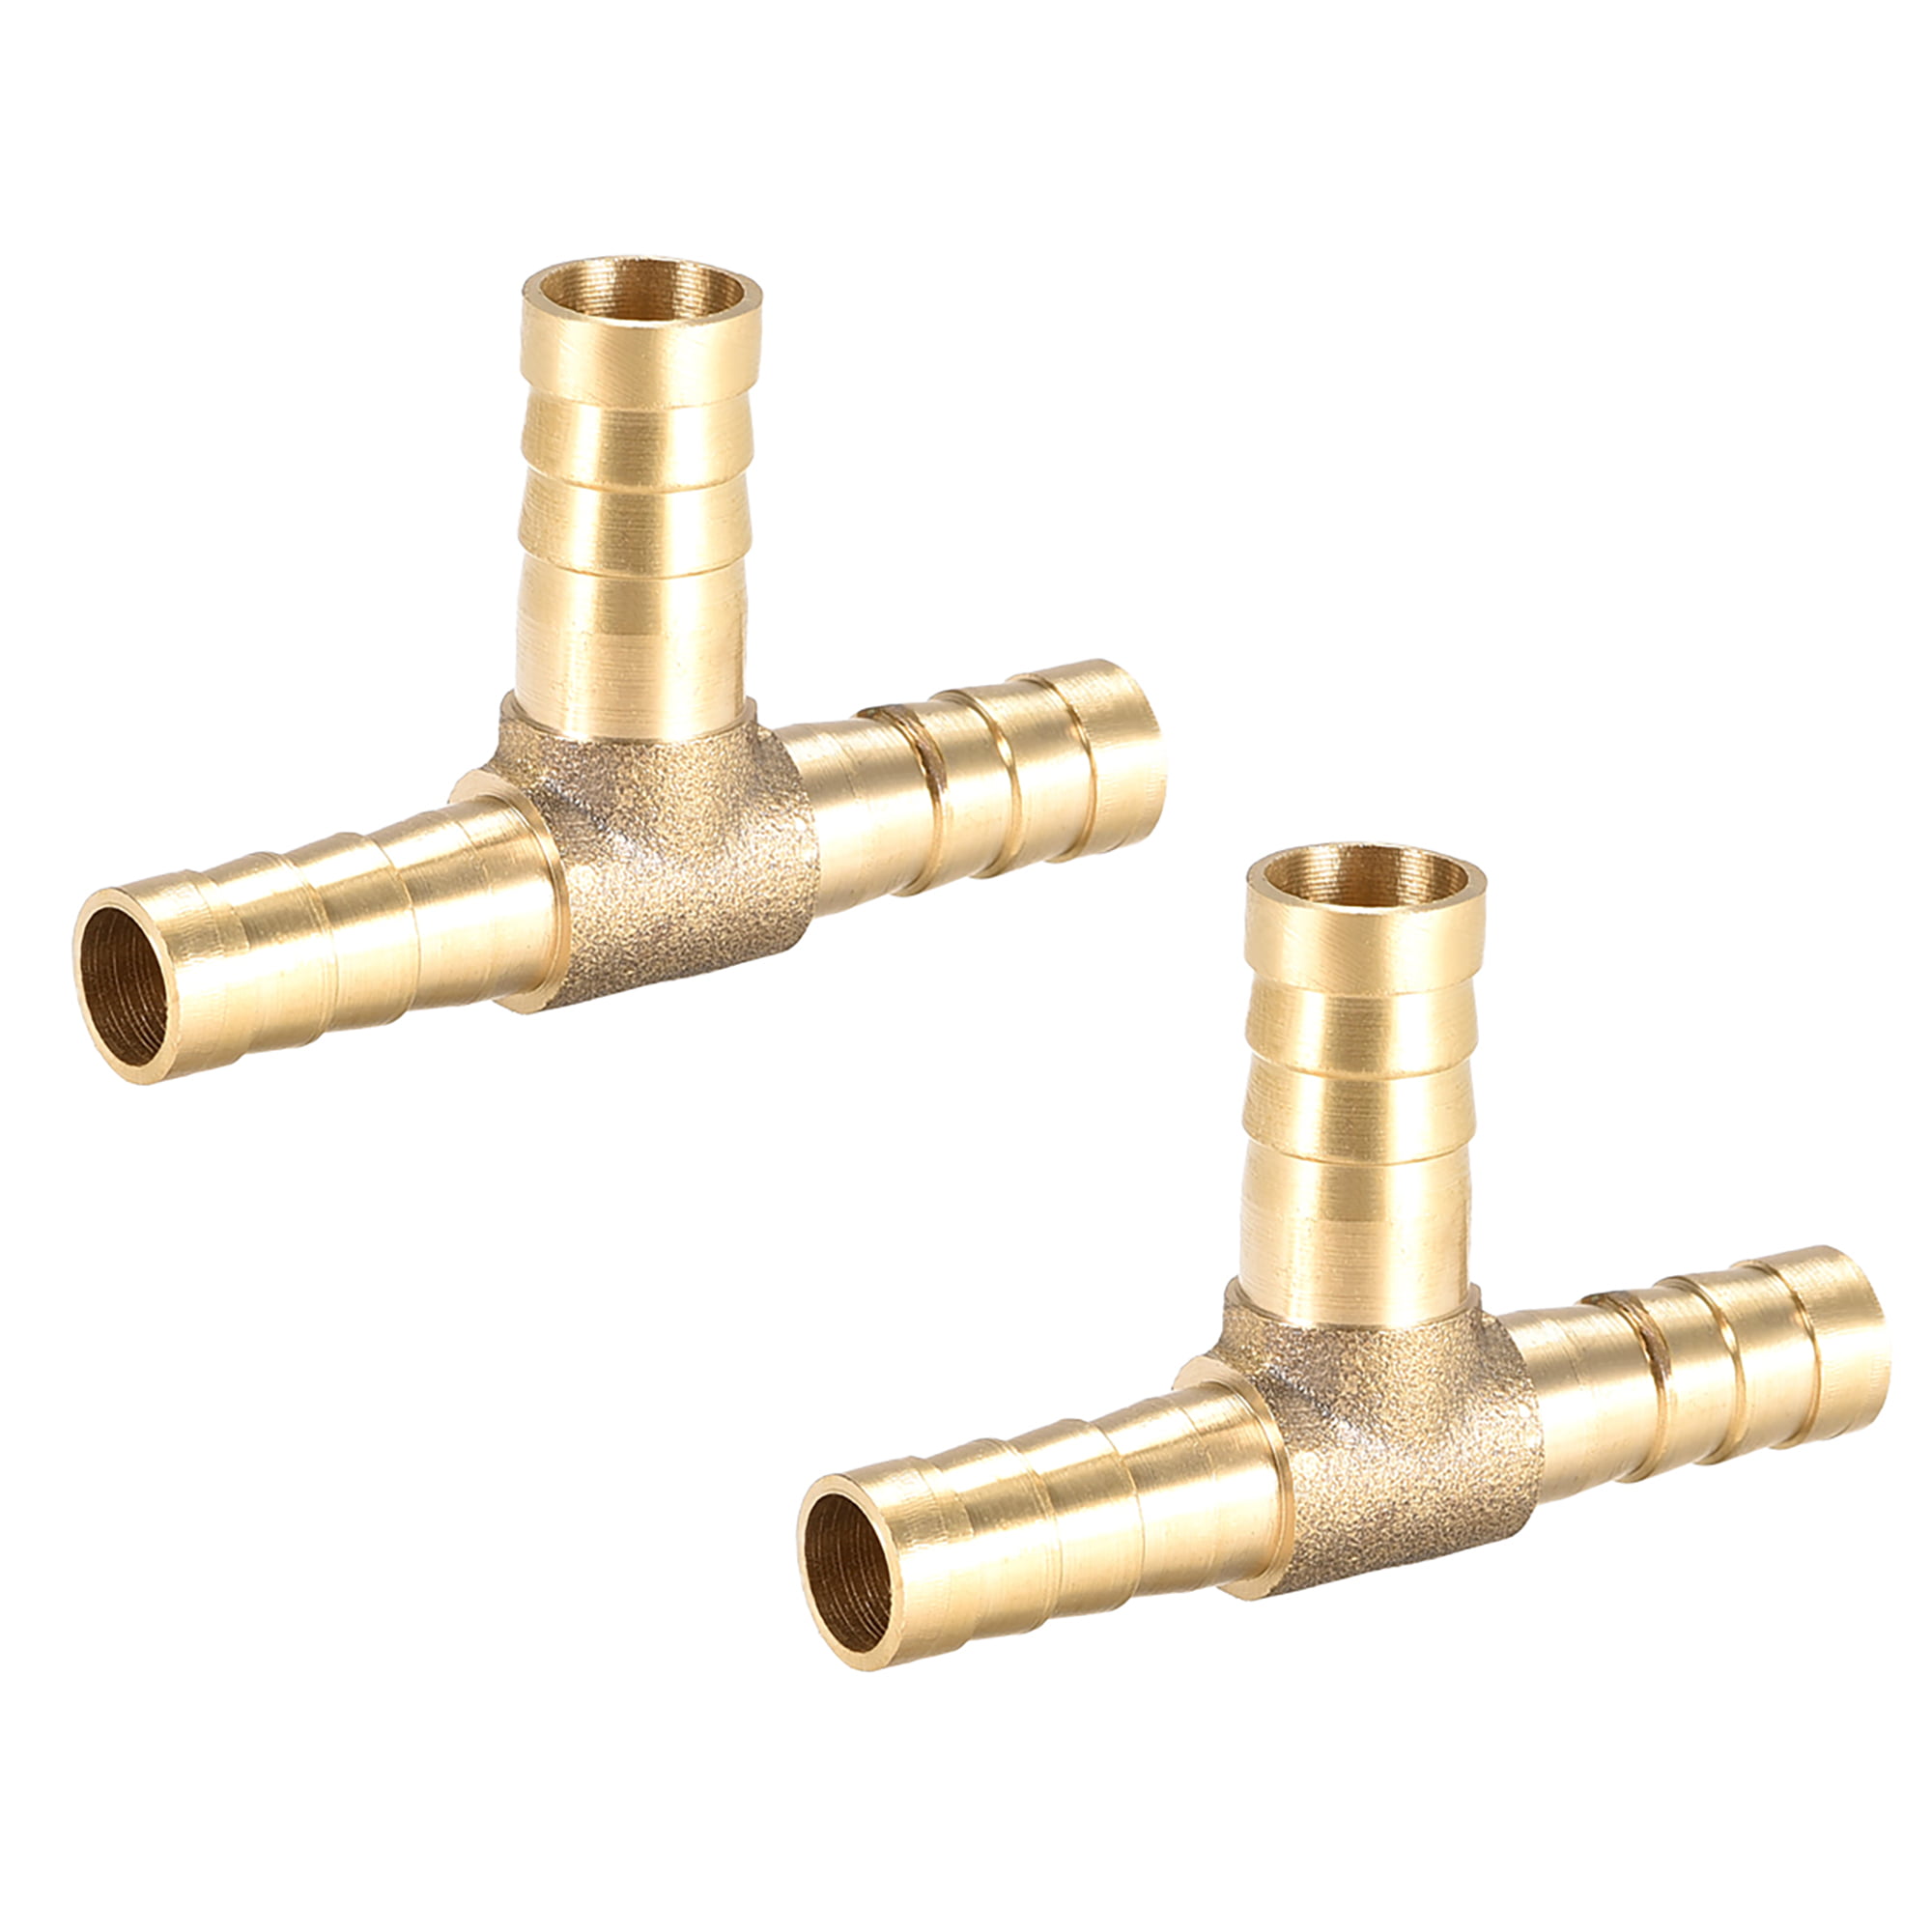 Pipe Tube Connectors Hose Tail Barb Fitting Union Fuel Water Fluids Air  Brass 